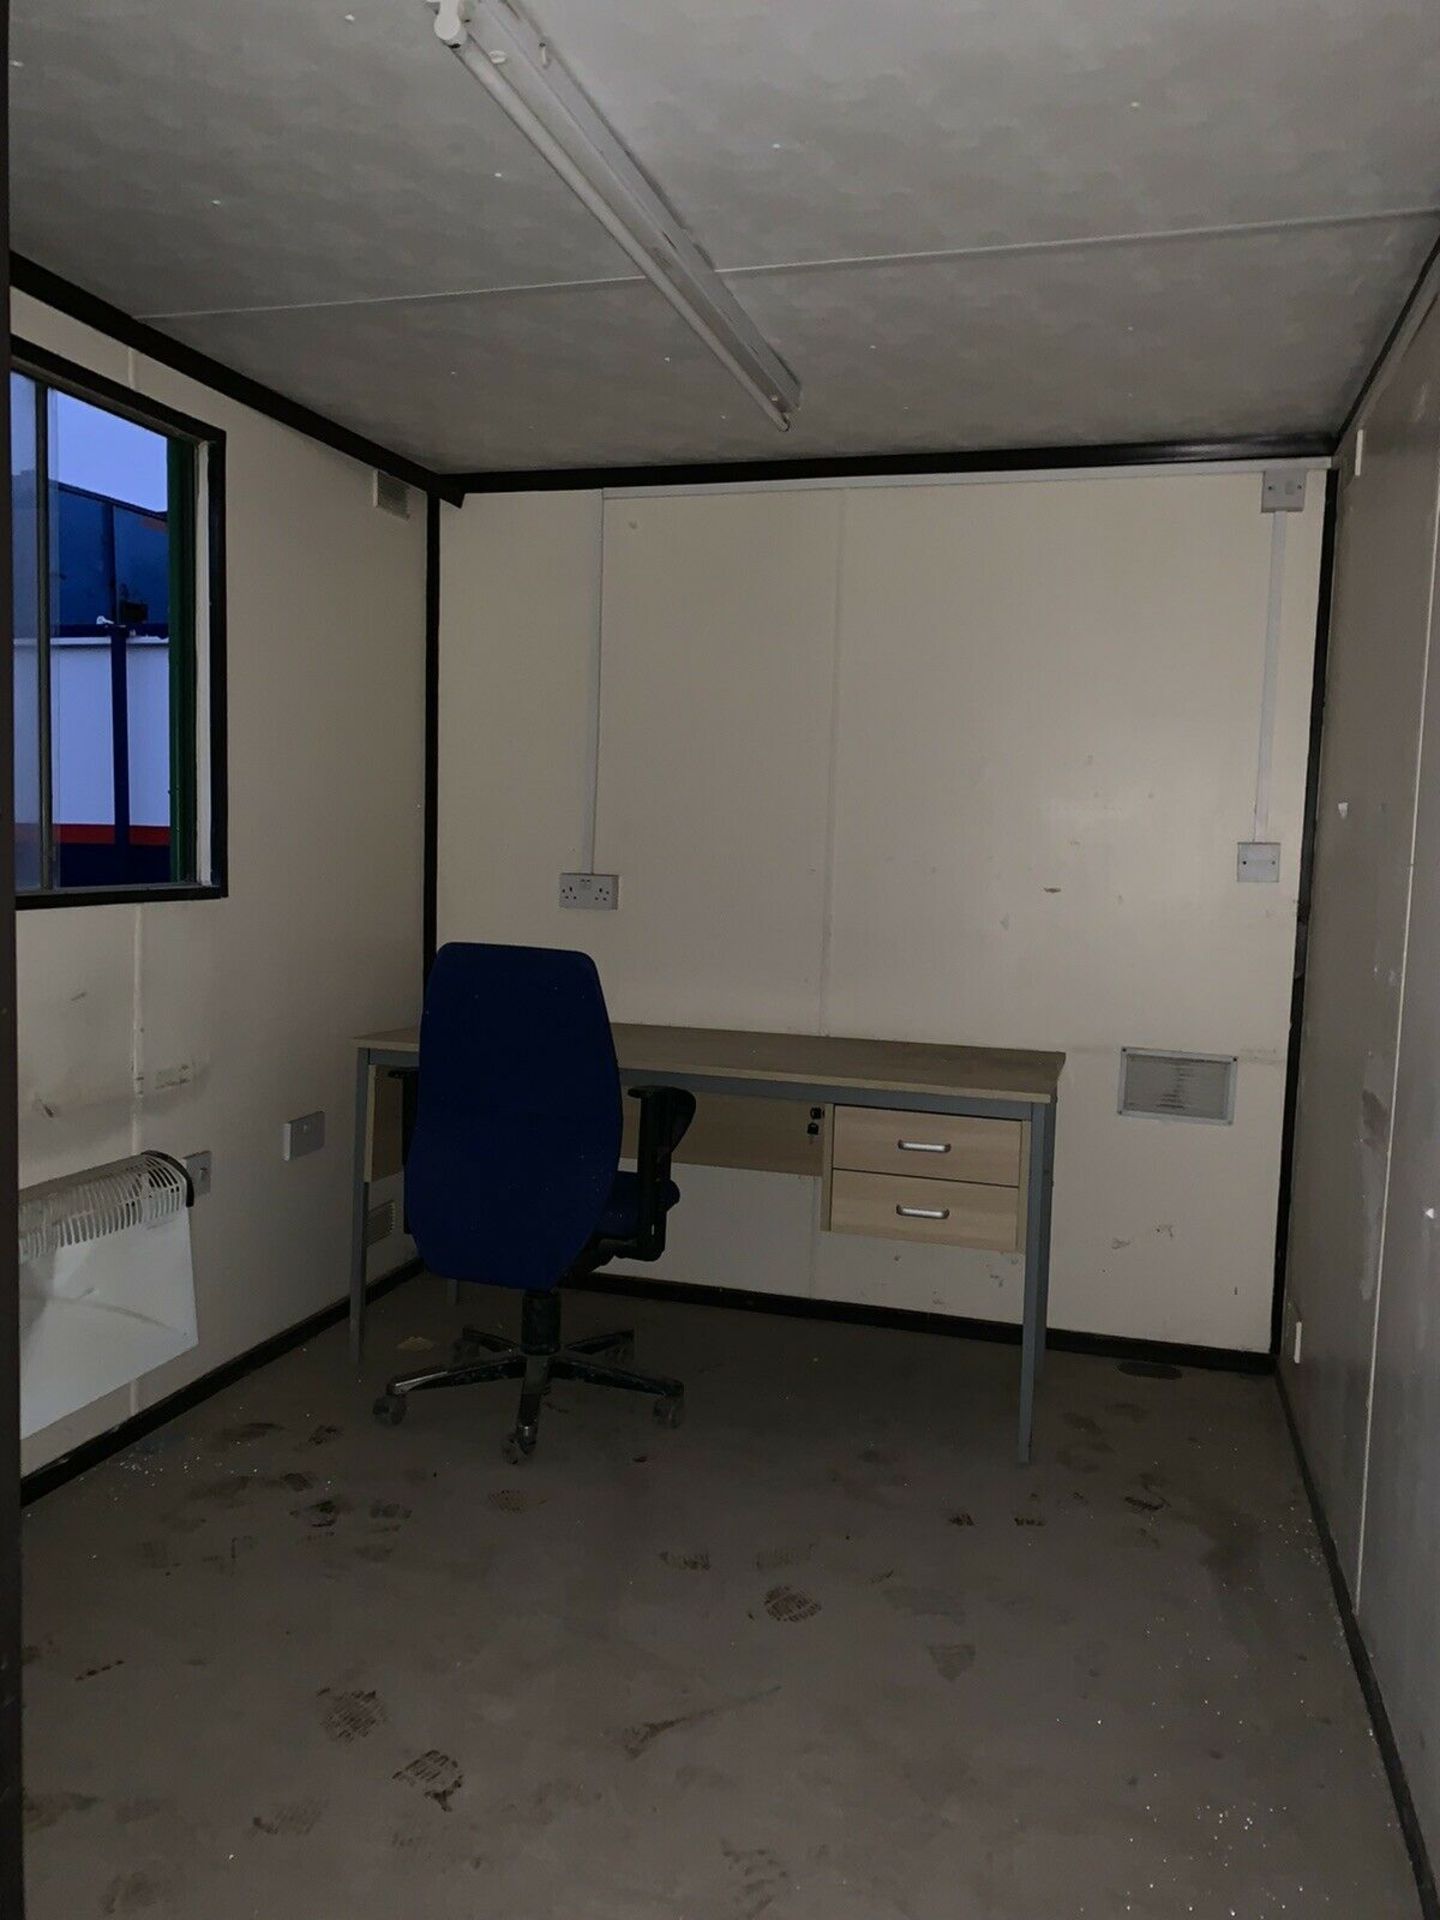 Anti Vandal Steel Portable Office 10ft x 8ft - Image 3 of 5